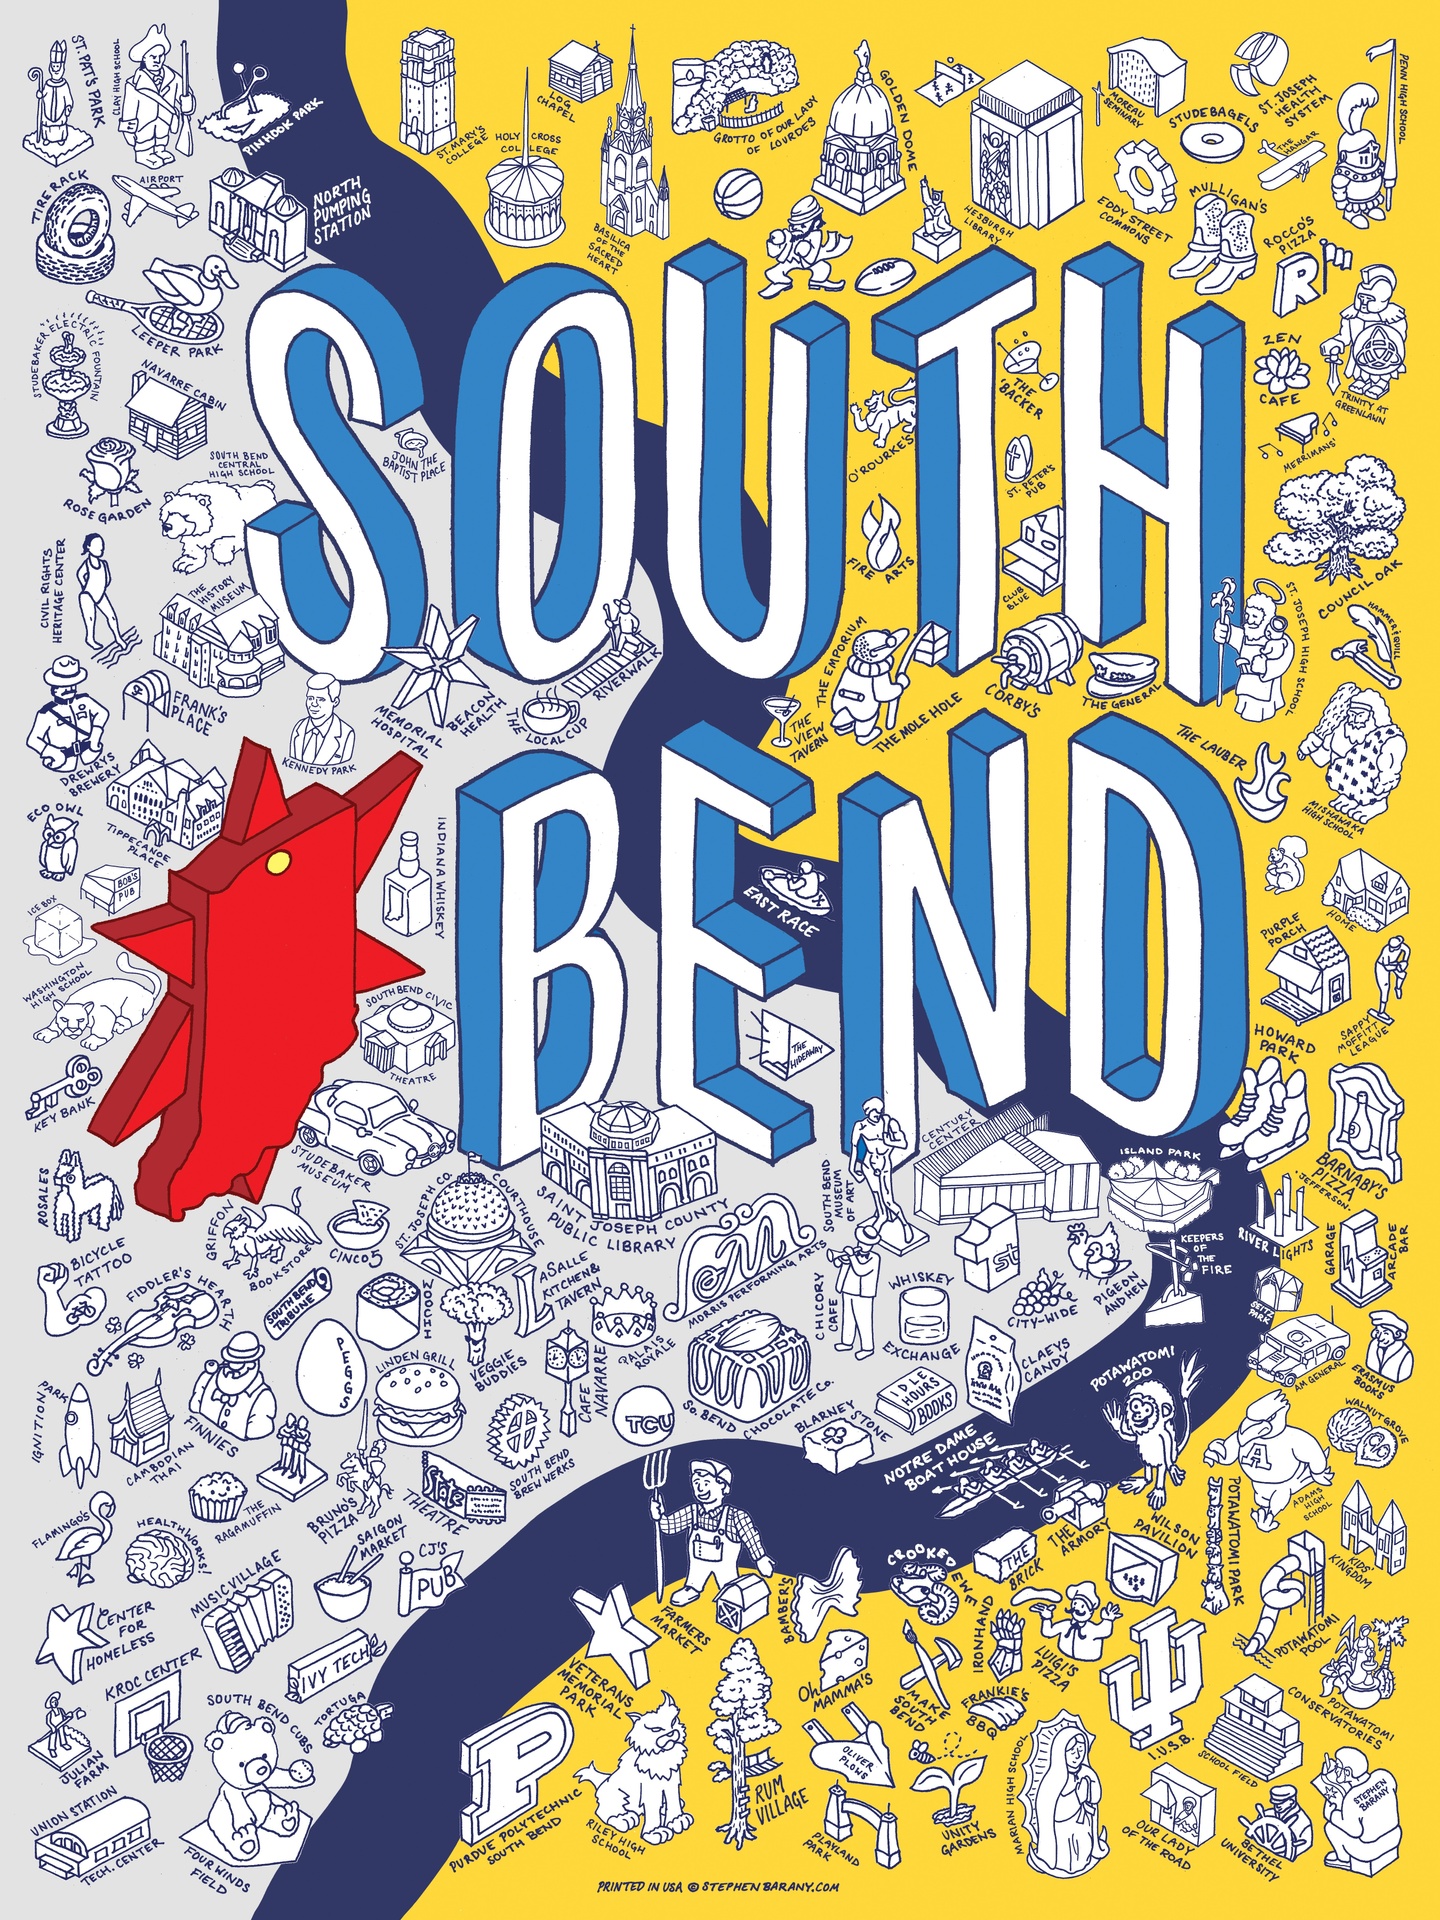 An illustrated map poster of South Bend includes drawings schools, businesses, and community icons